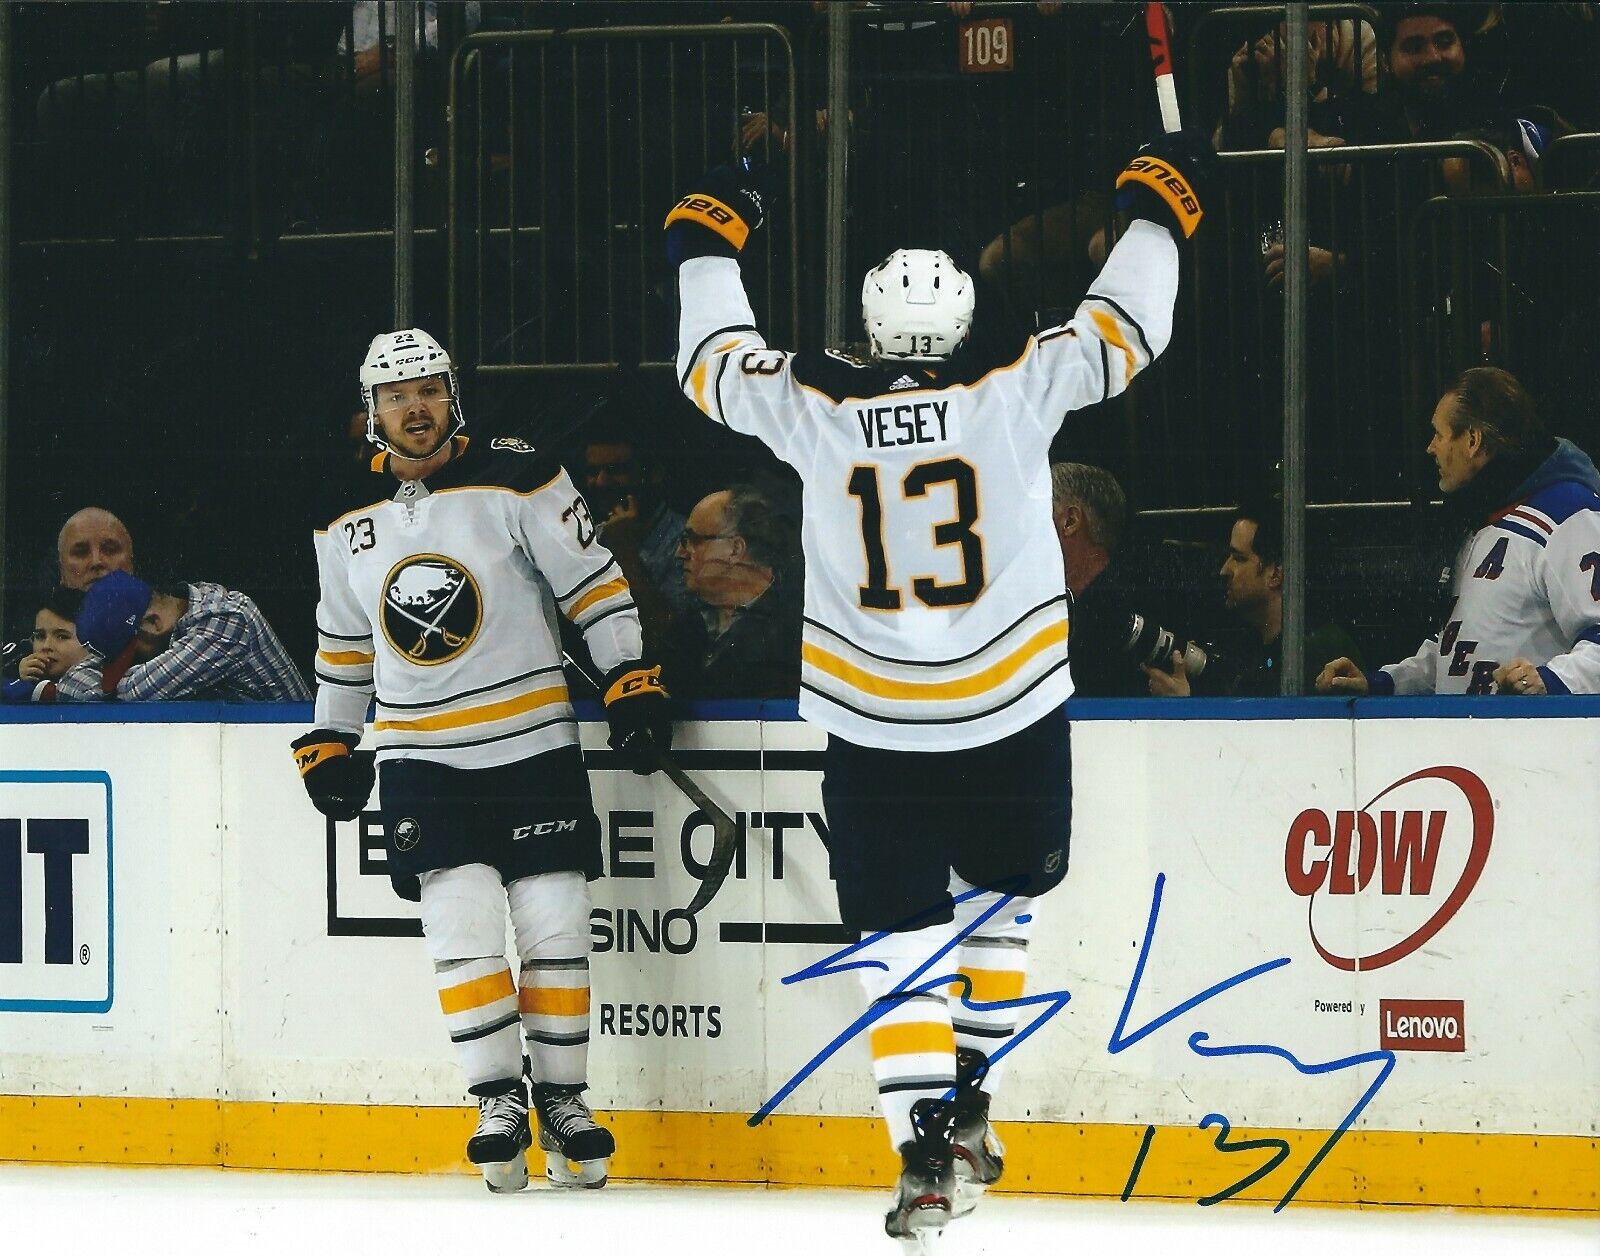 Autographed 8x10 JIMMY VESEY Buffalo Sabres 8x10 Photo Poster painting - w/ COA